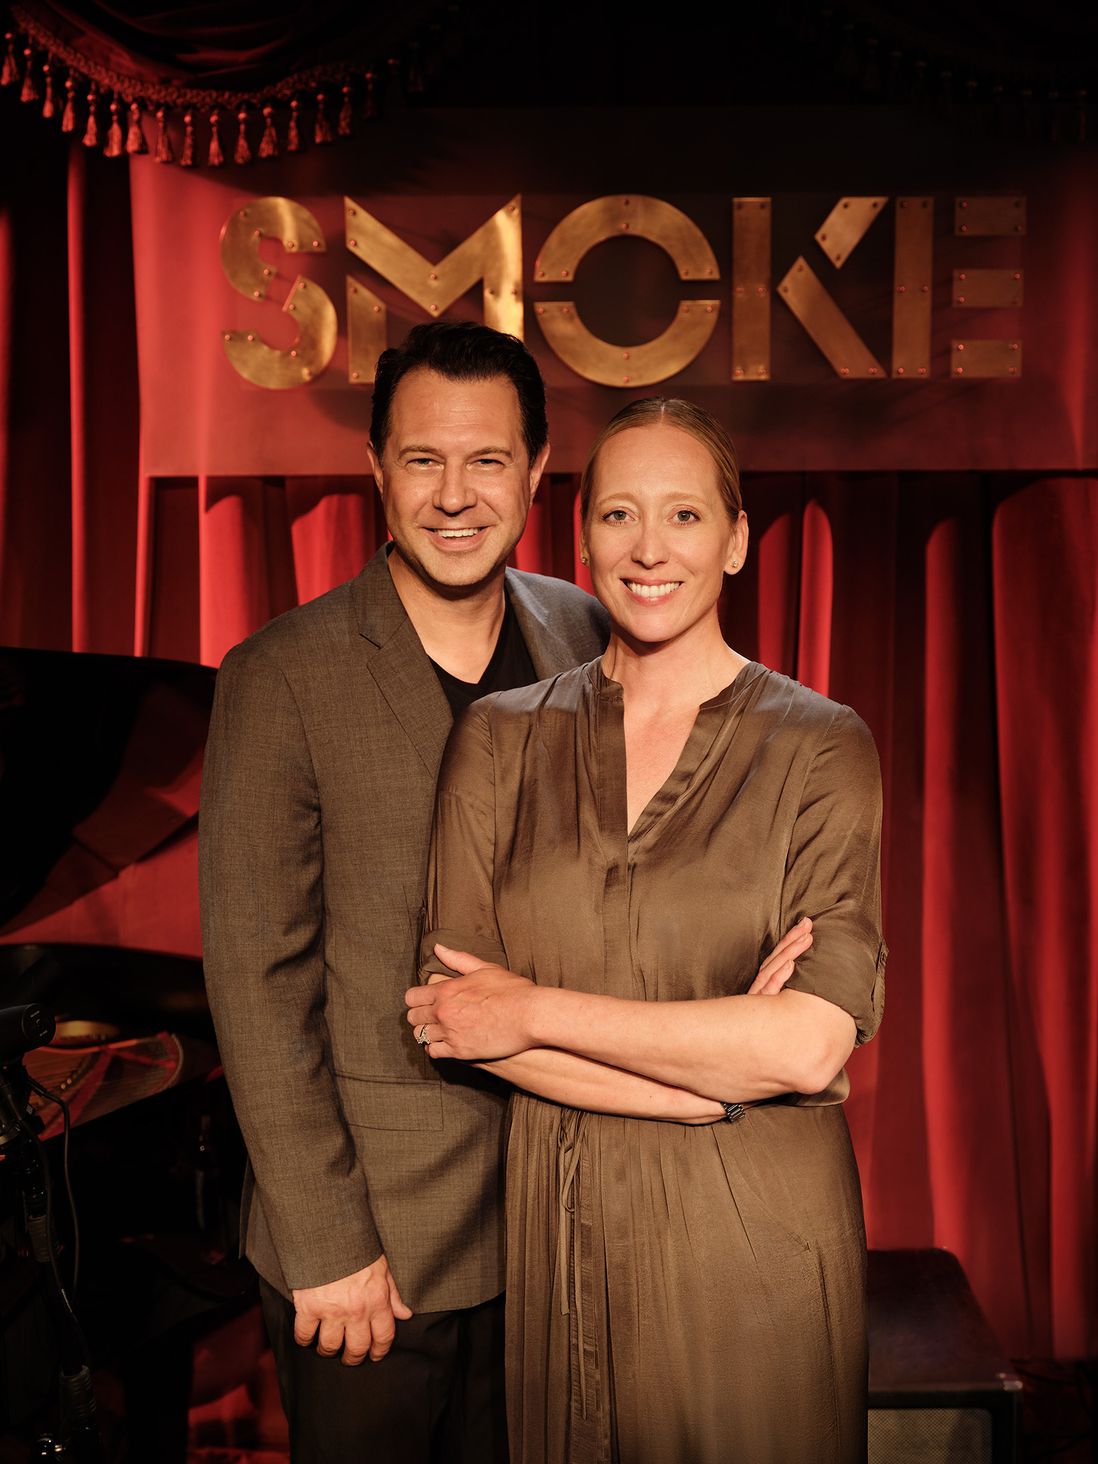 A photo of Smoke co-owners Paul Stache and Molly Sparrow Johnson